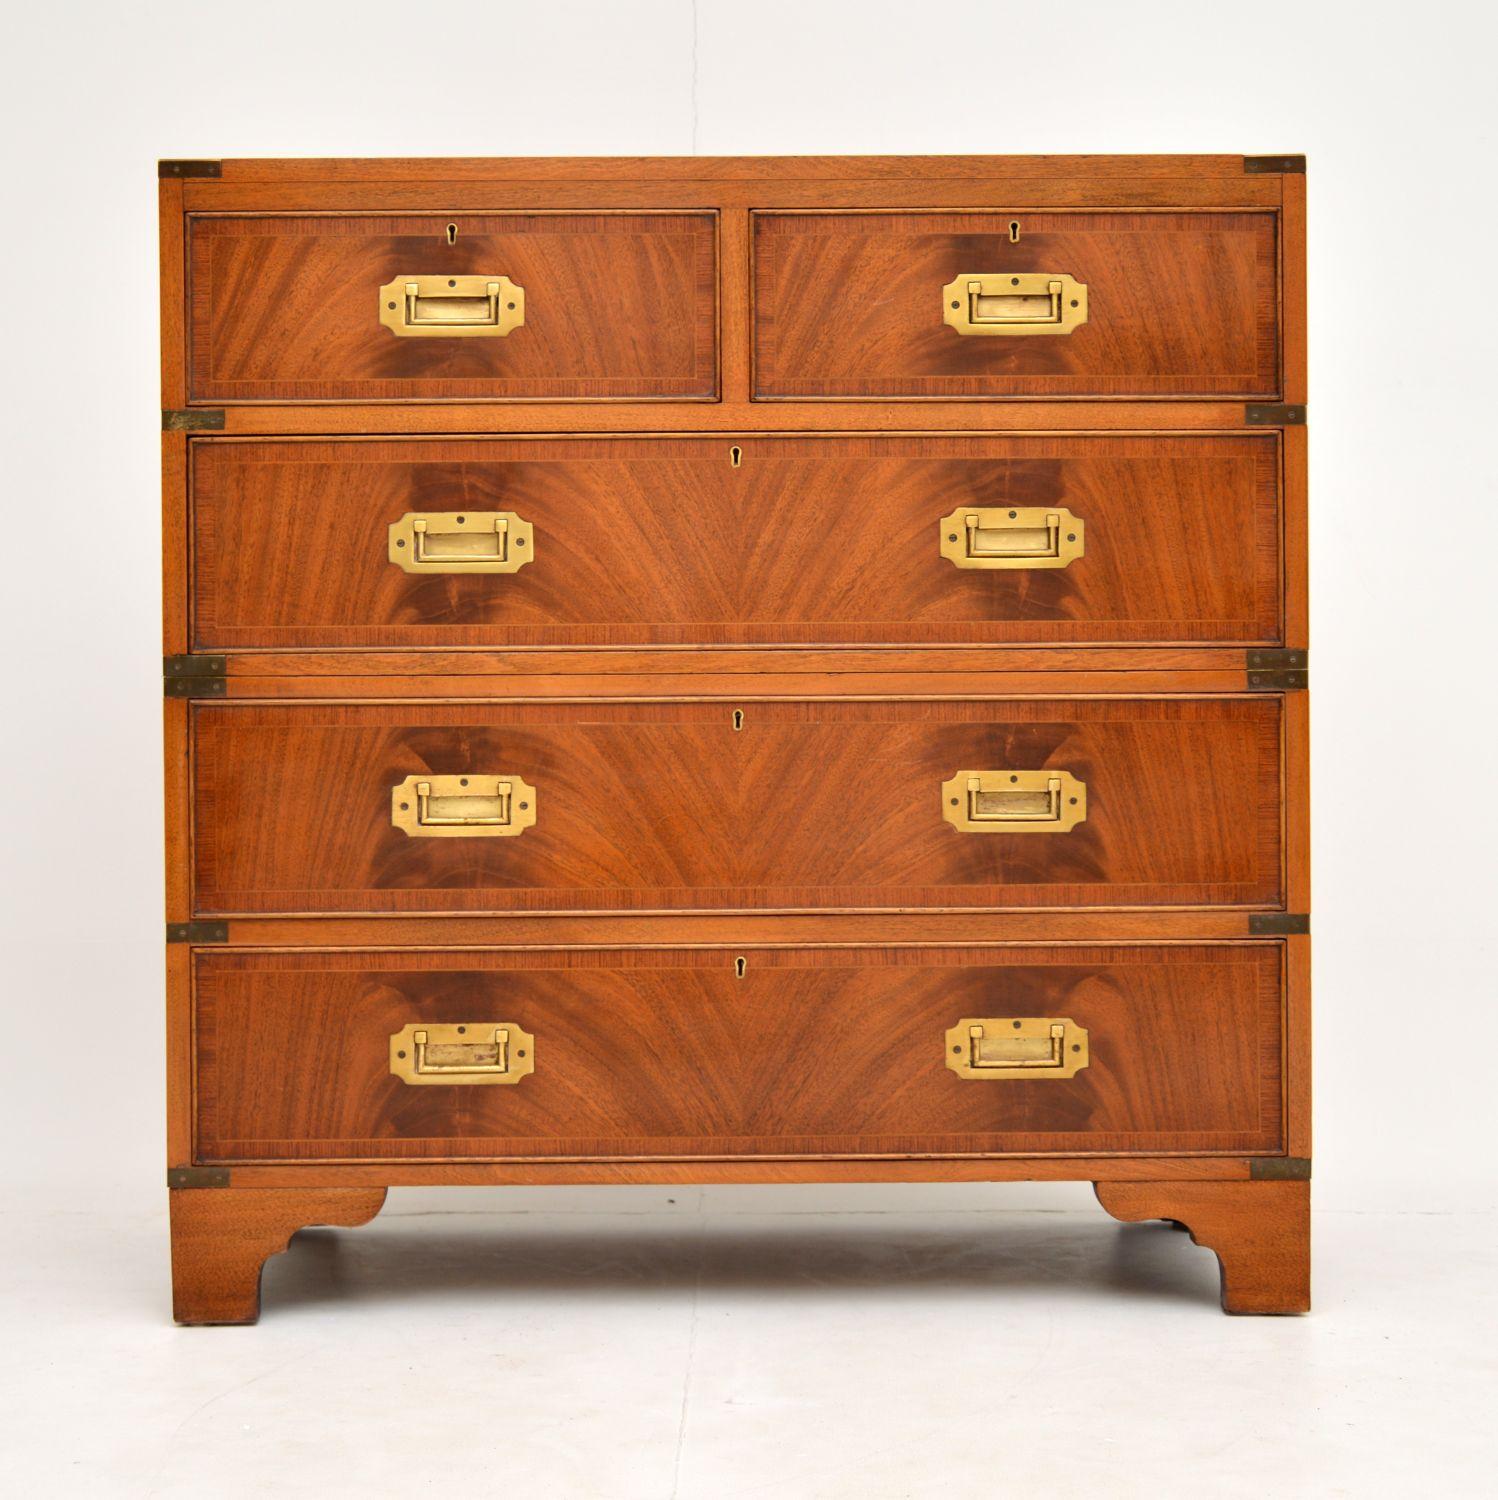 A super smart and stylish chest of drawers in the antique military Campaign style. It’s unusual to see this in beautiful flame mahogany like this and it’s of super quality.

This dates from circa 1930s period, and is in superb condition, we have